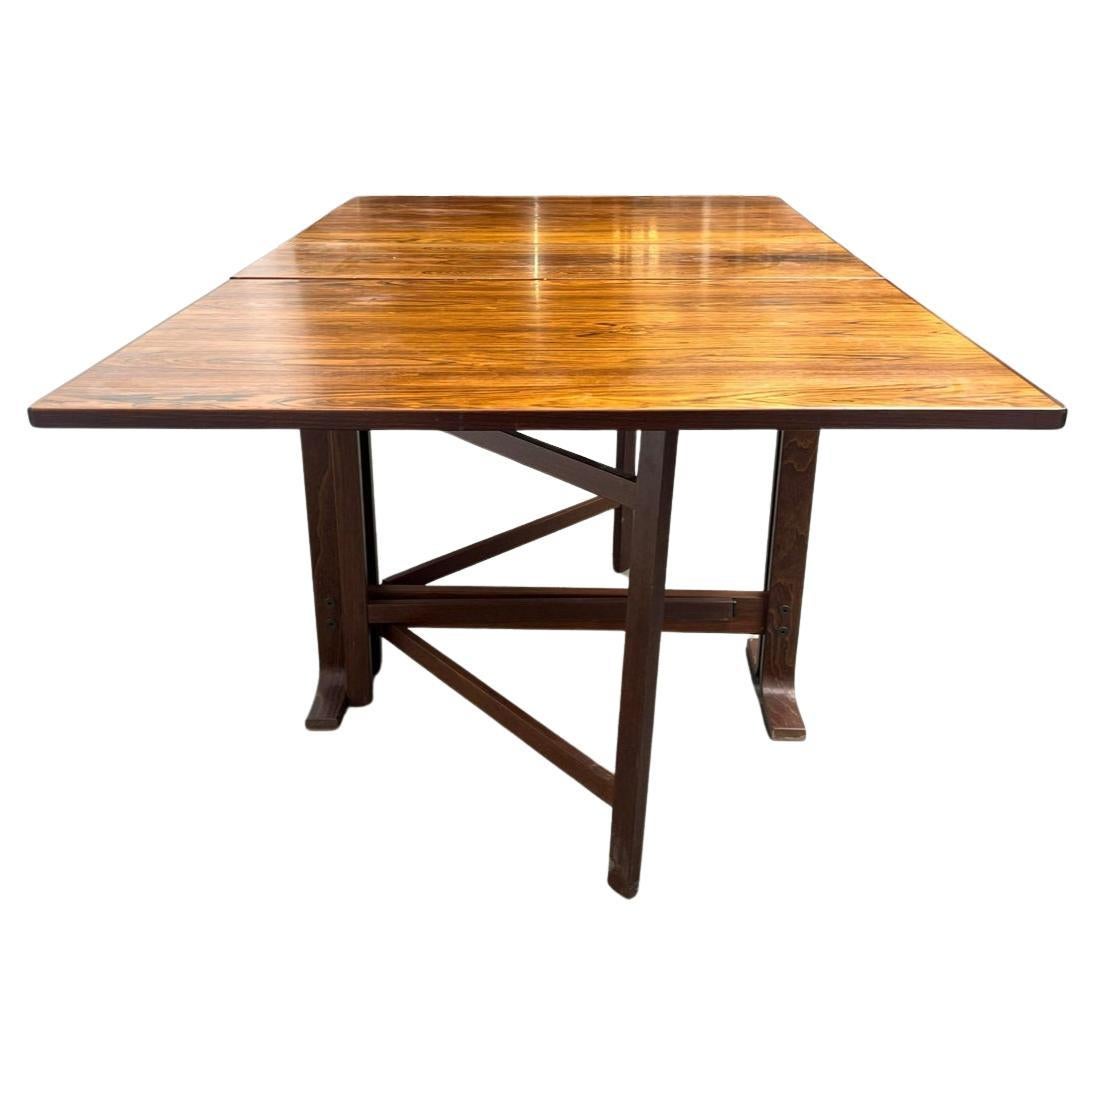 Mid century Danish modern Bruno Mathsson Style rosewood folding Dining table. Has (2) drop leaves and folds up compact. Table fully open measures 59